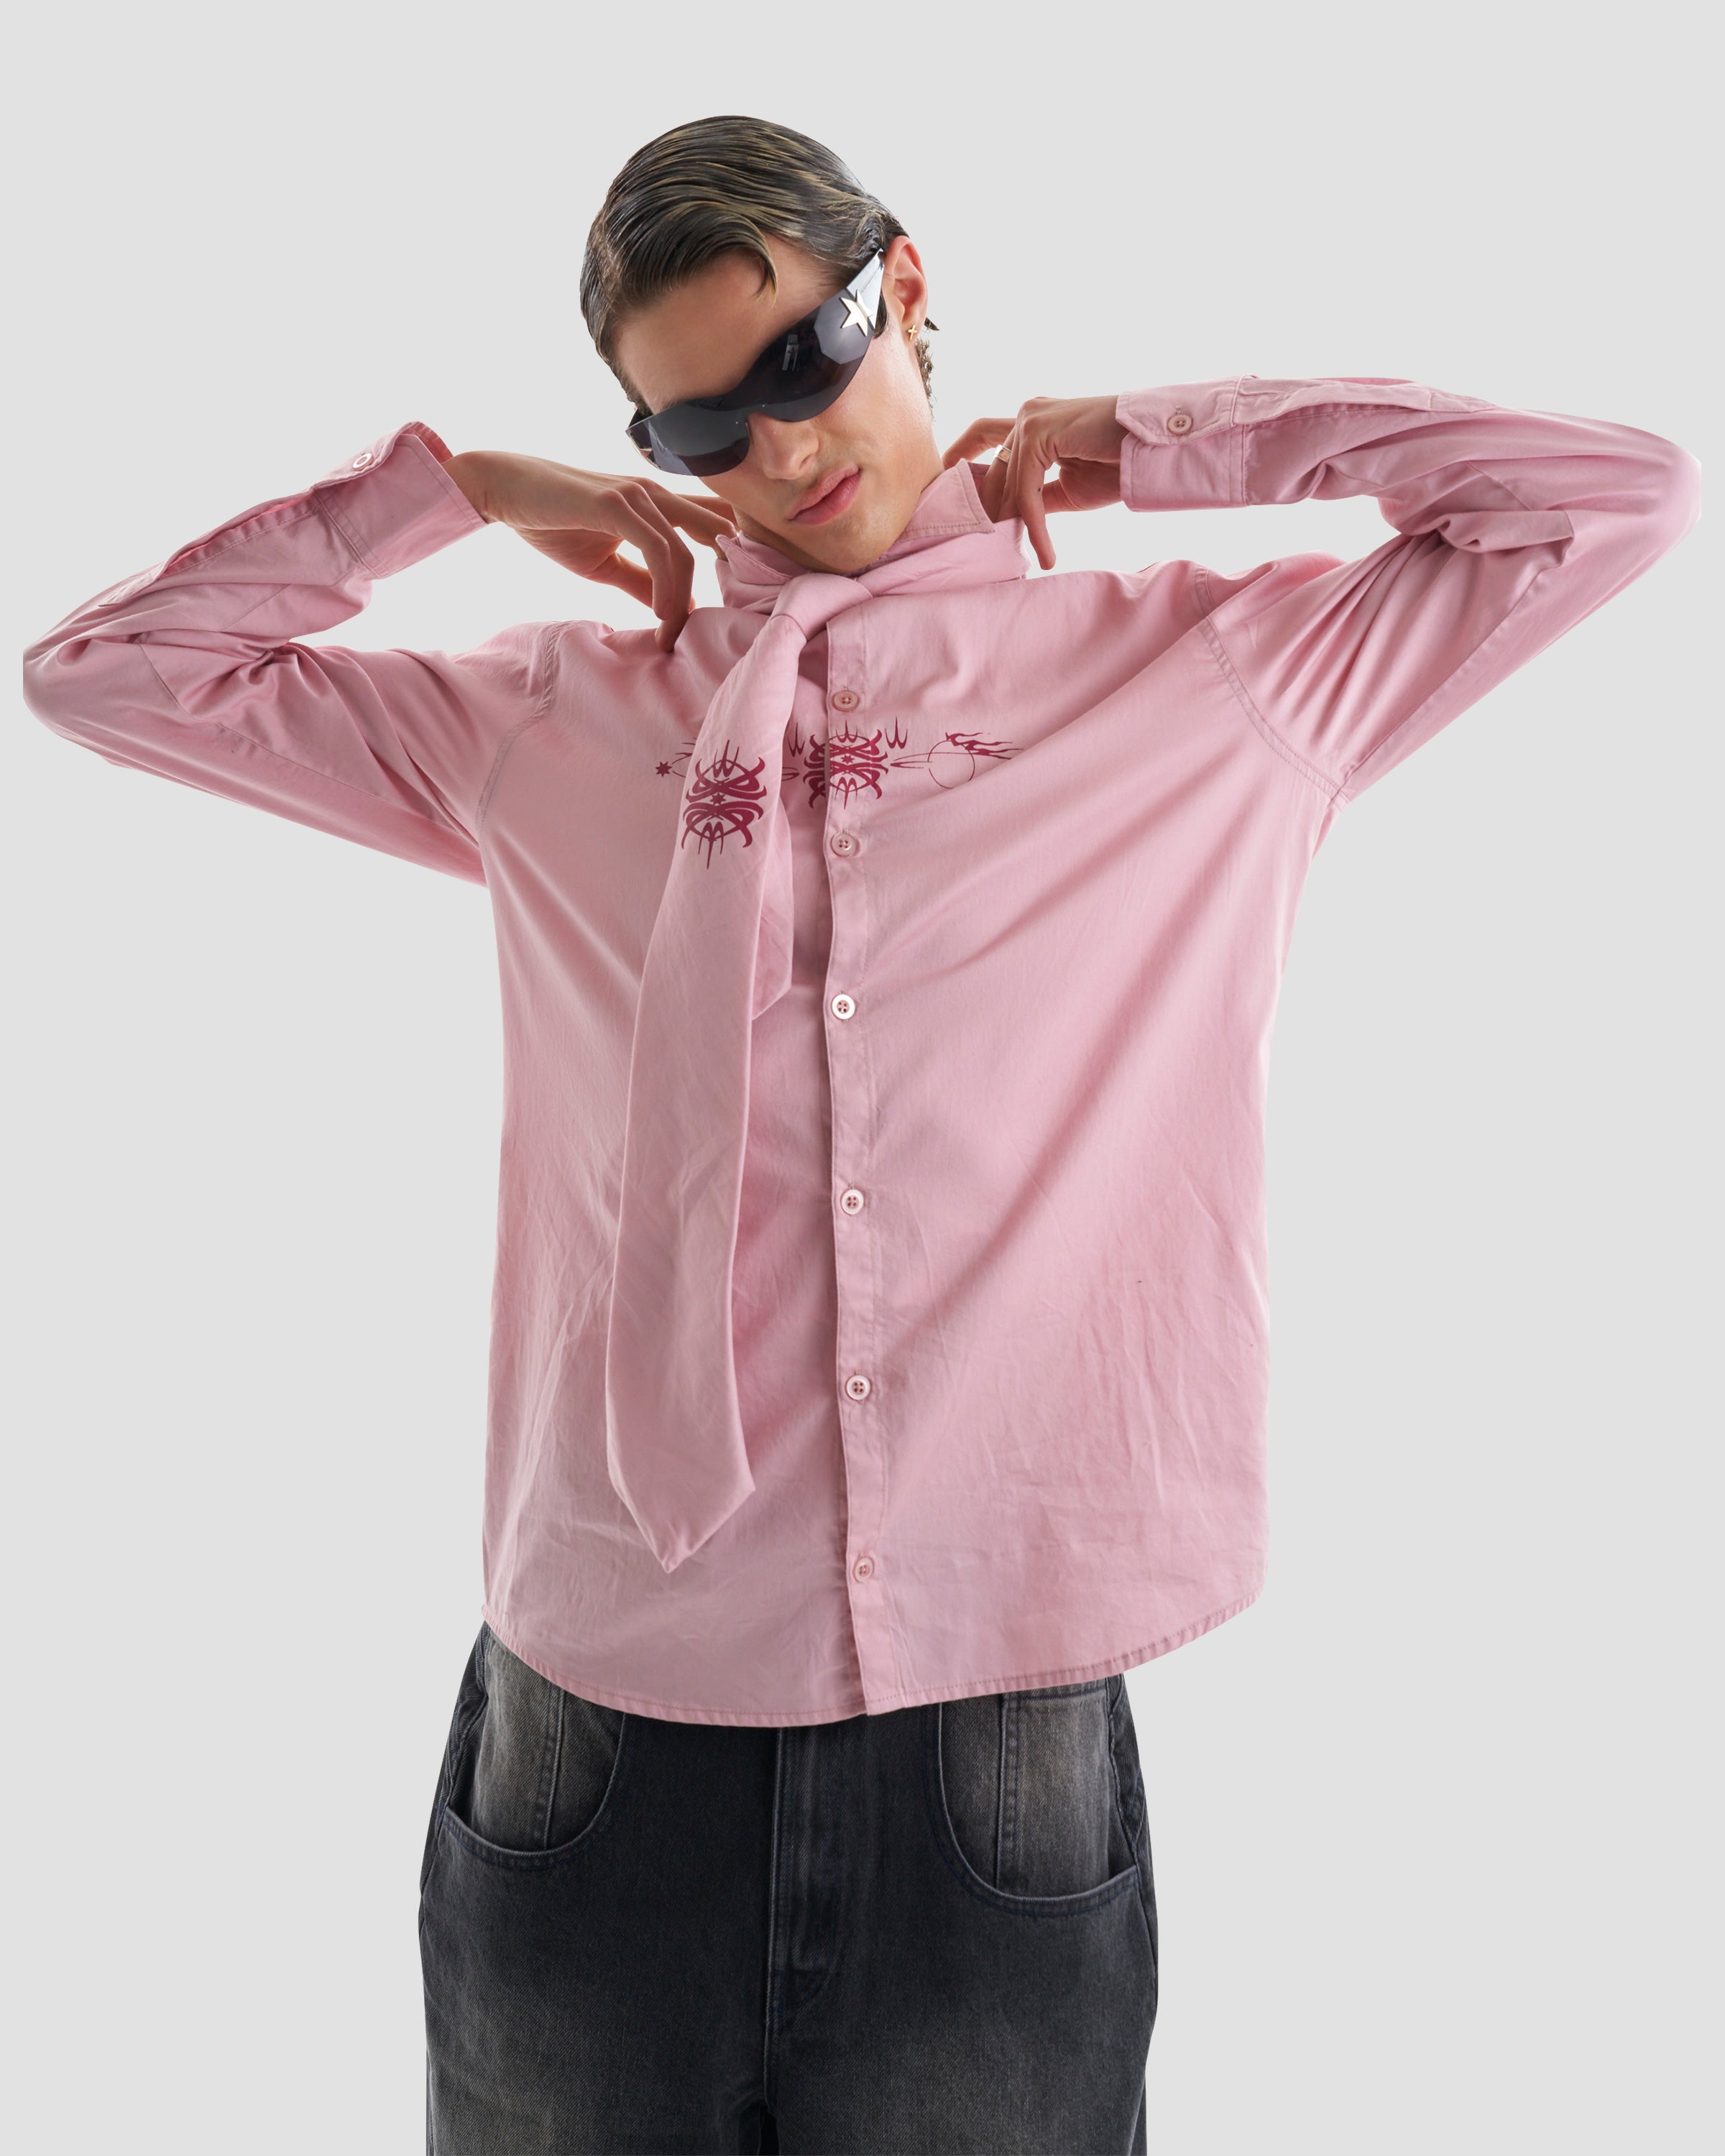 Kash Set Oversized Shirt and Tie with Tattoo Print in Pink